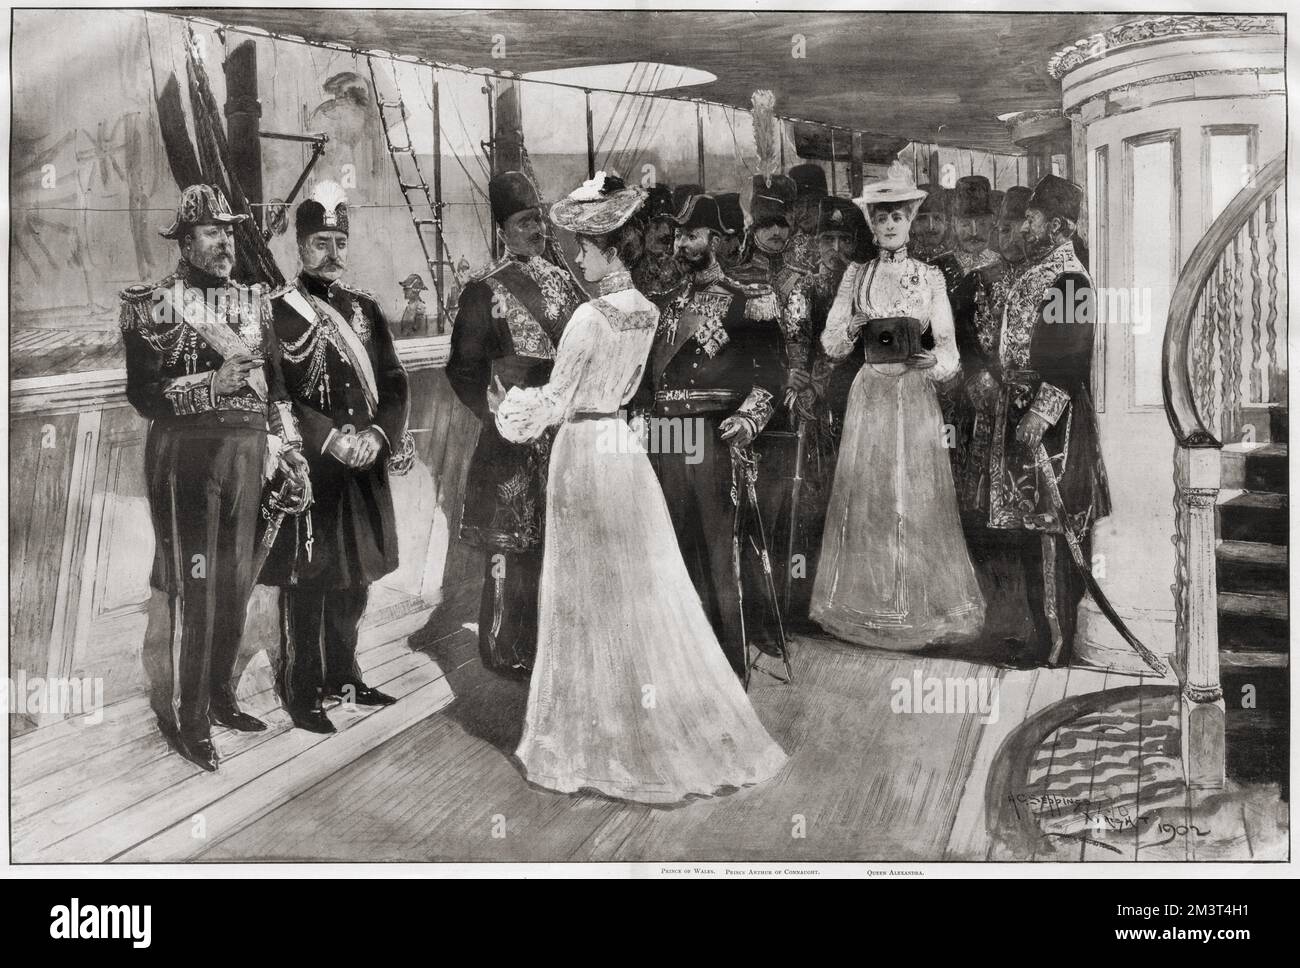 The visit of Muzaffir-ed-Din (Mozaffar ad-Din Shah Qajar), Shah of Persia, to King Edward VII at Portsmouth on 20th August 1902: Princess Victoria photographing the King and the Shah on board the Royal Yacht. Queen Alexandra is also shown using her camera. Stock Photo